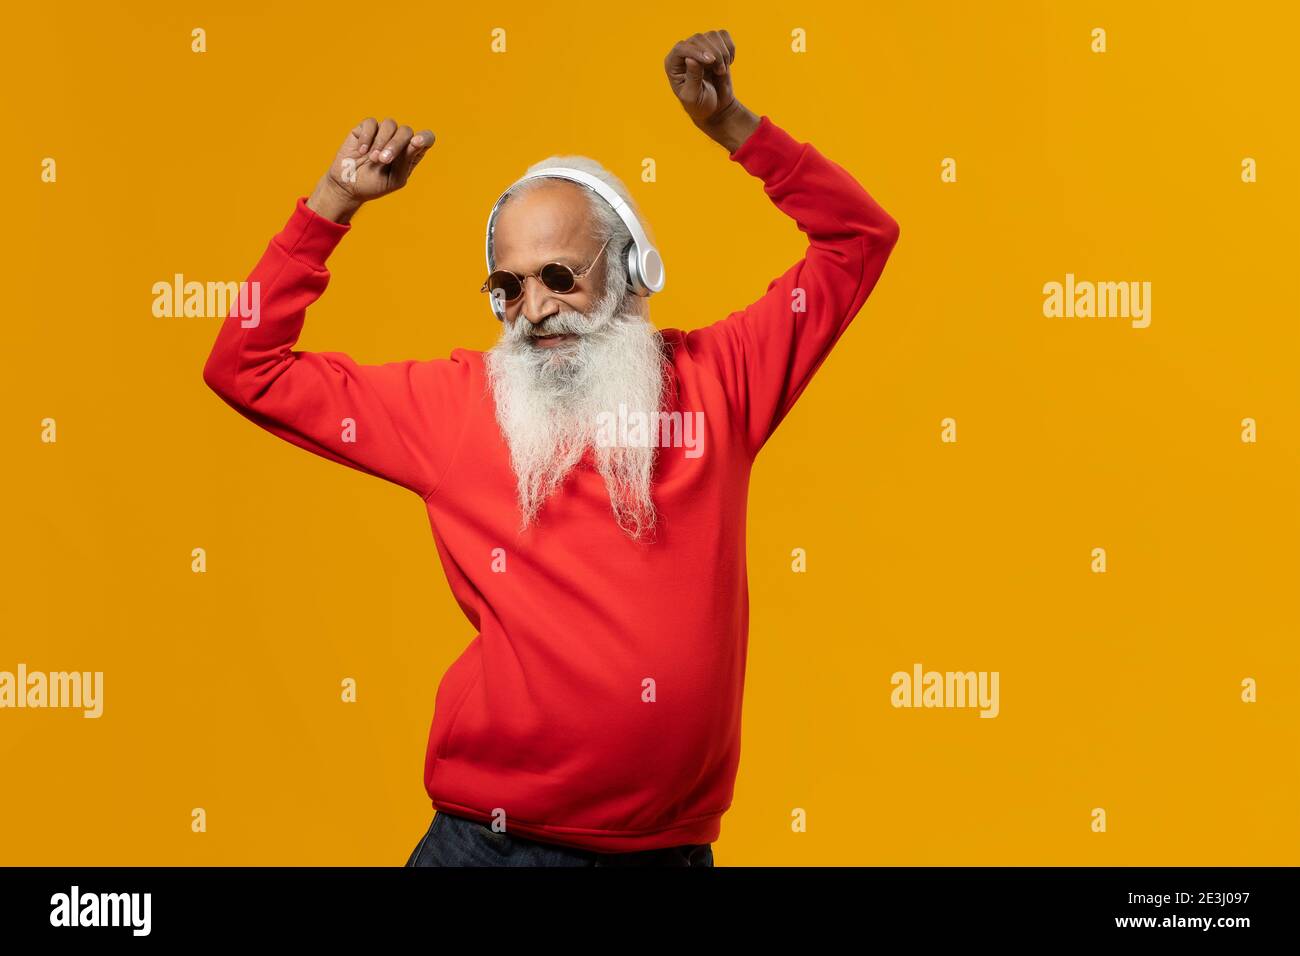 A STYLISH OLD MAN HAPPILY DANCING WHILE LISTENING TO MUSIC Stock Photo